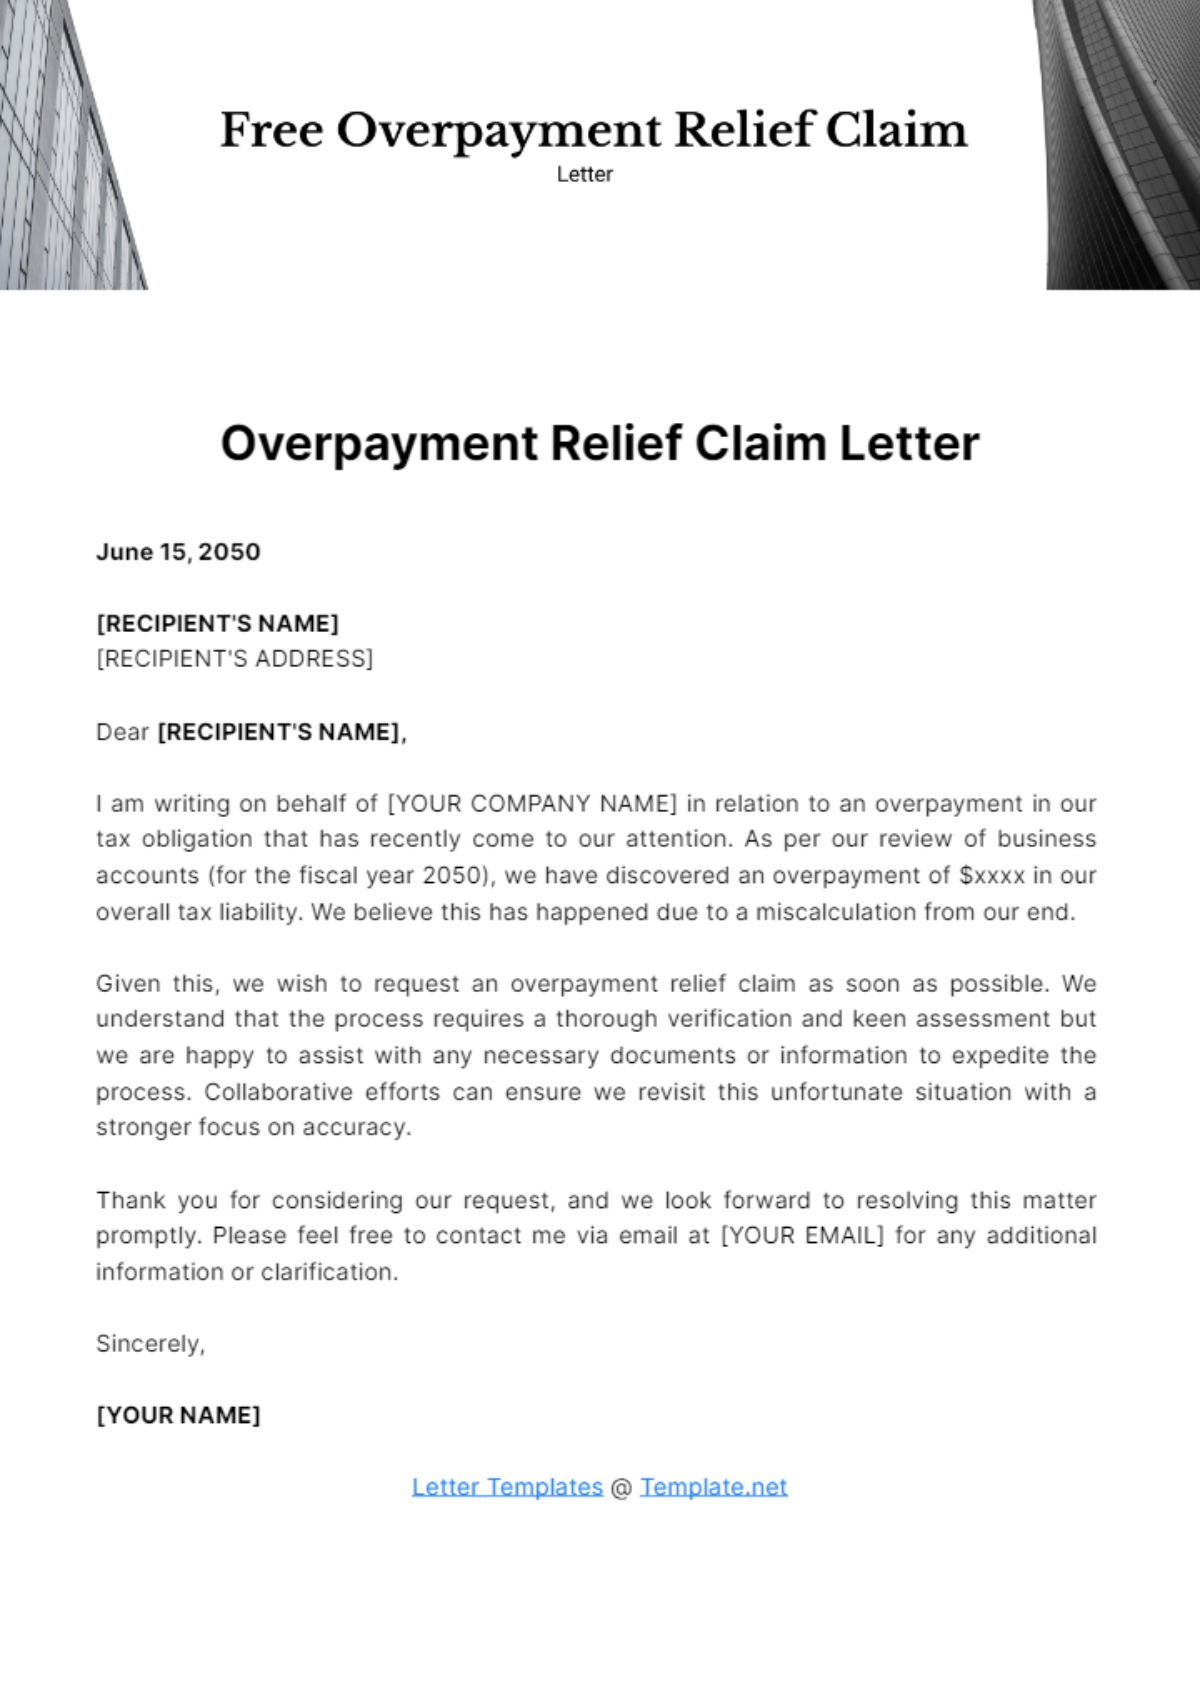 Free Overpayment Relief Claim Letter Template